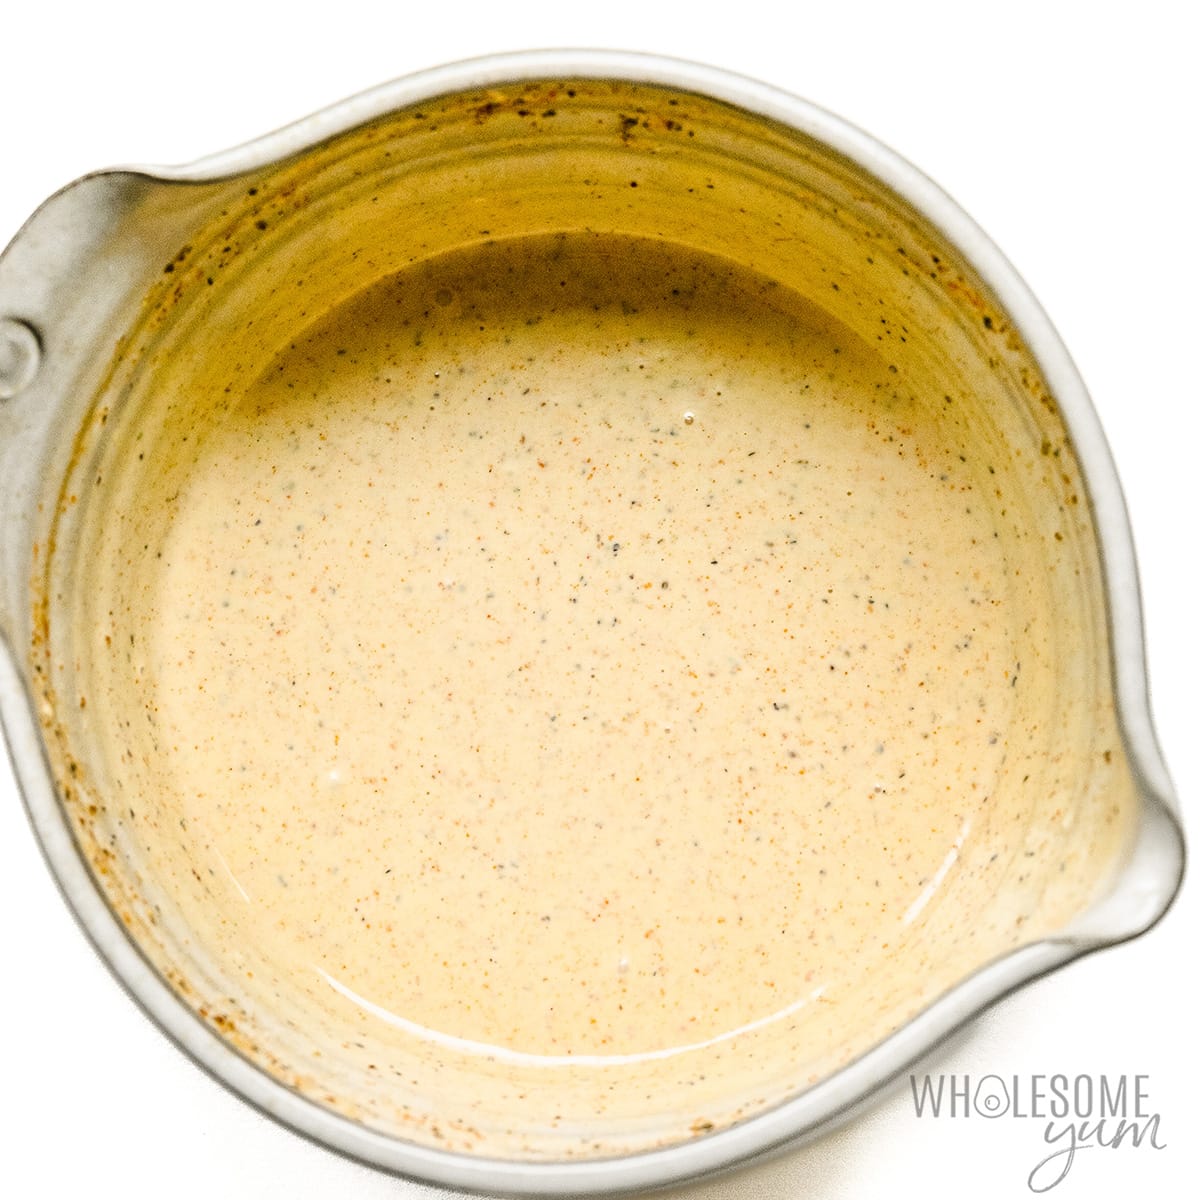 Mayo and other seasonings whisked together in a bowl.